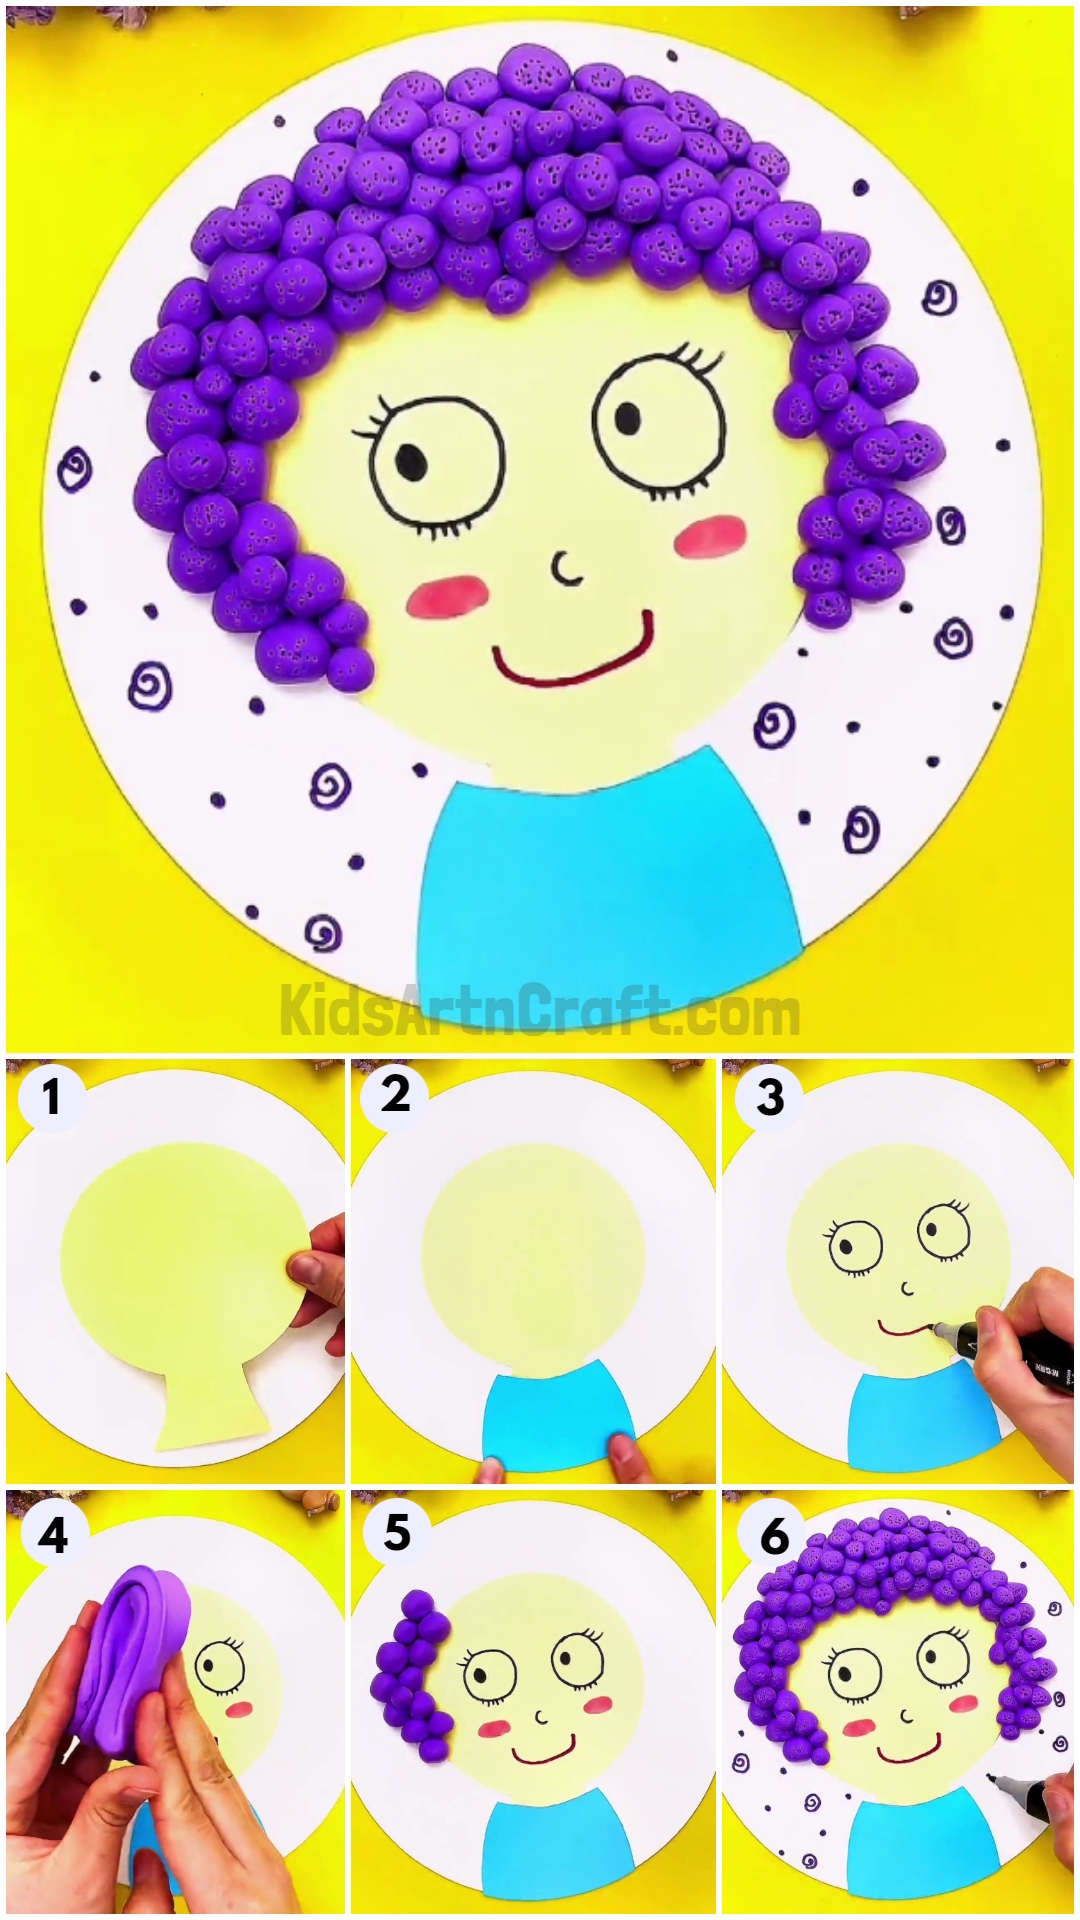 Doll Craft Using Clay Step-by-step Tutorial